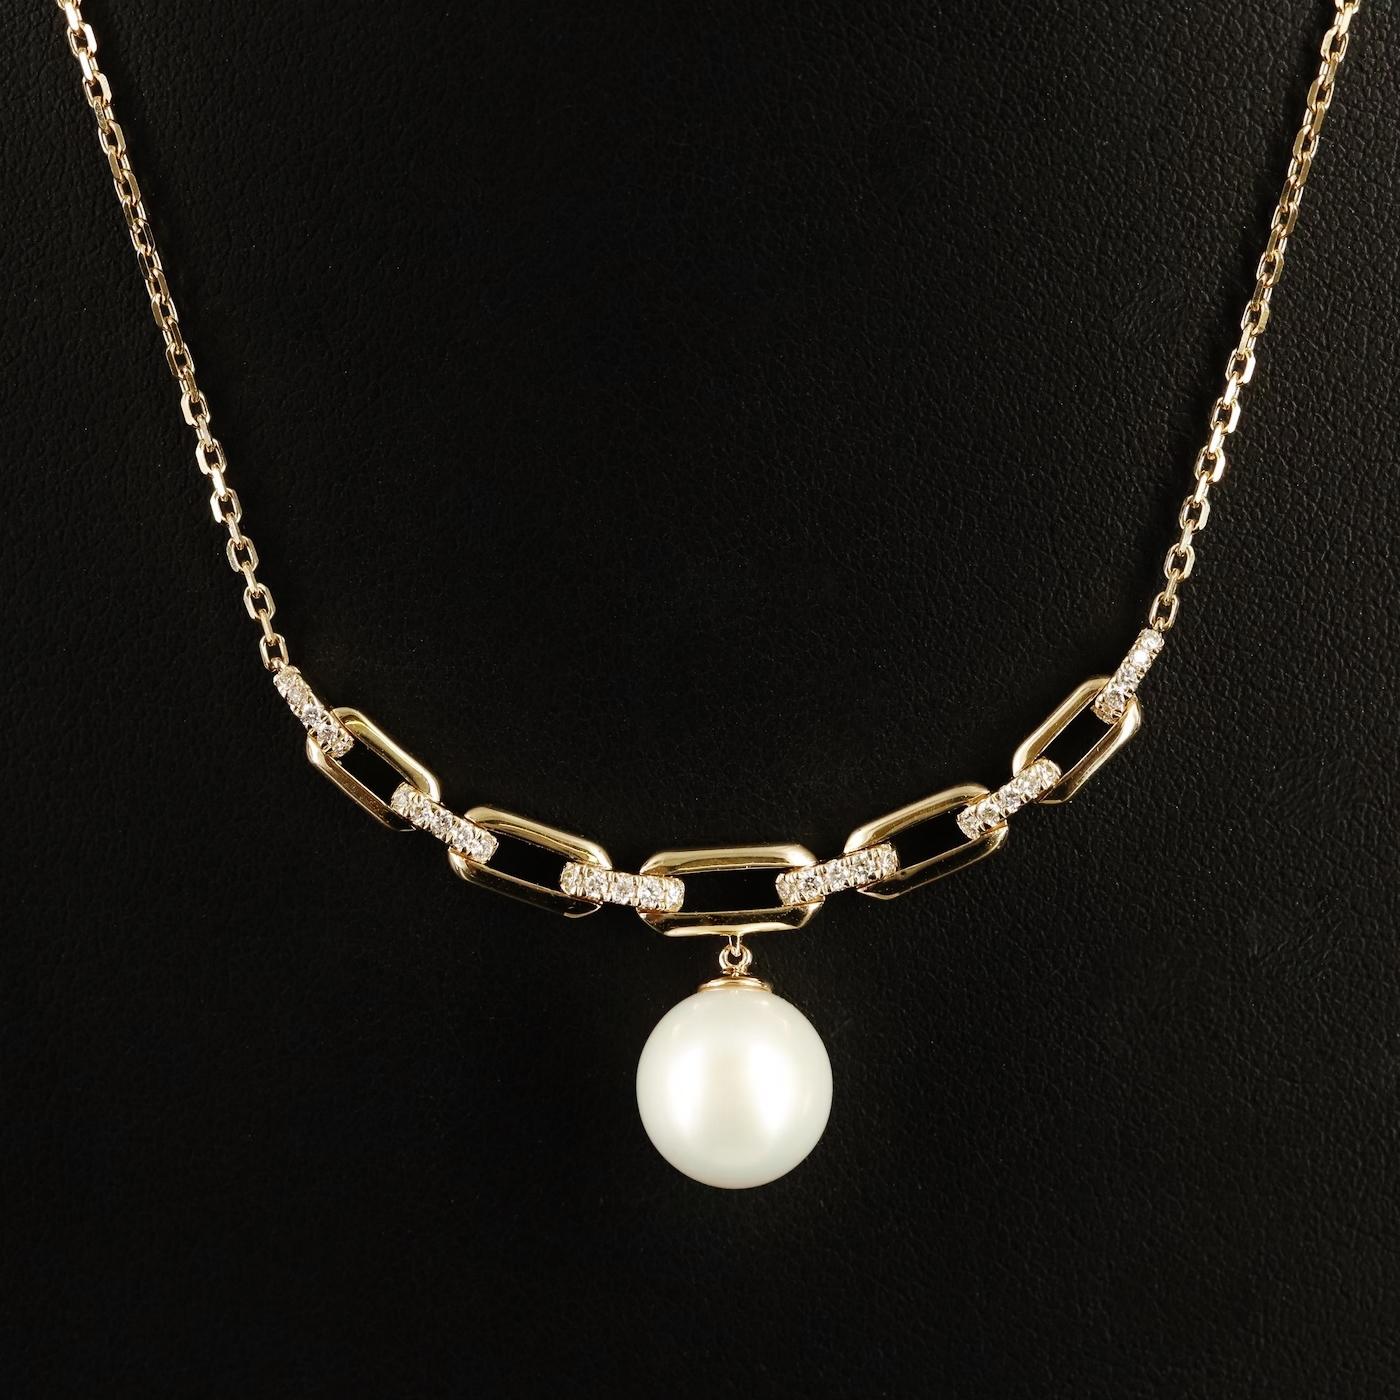 Designer EFFY necklace (stamped with the designer hallmarks)

NEW with tags, Tag Price $3950

Amazing Design, modern paperclip Design, studded with diamond and enhanced with a large AAA Pearl (9 mm large Pearl, creamy peachy whitish color)

14K